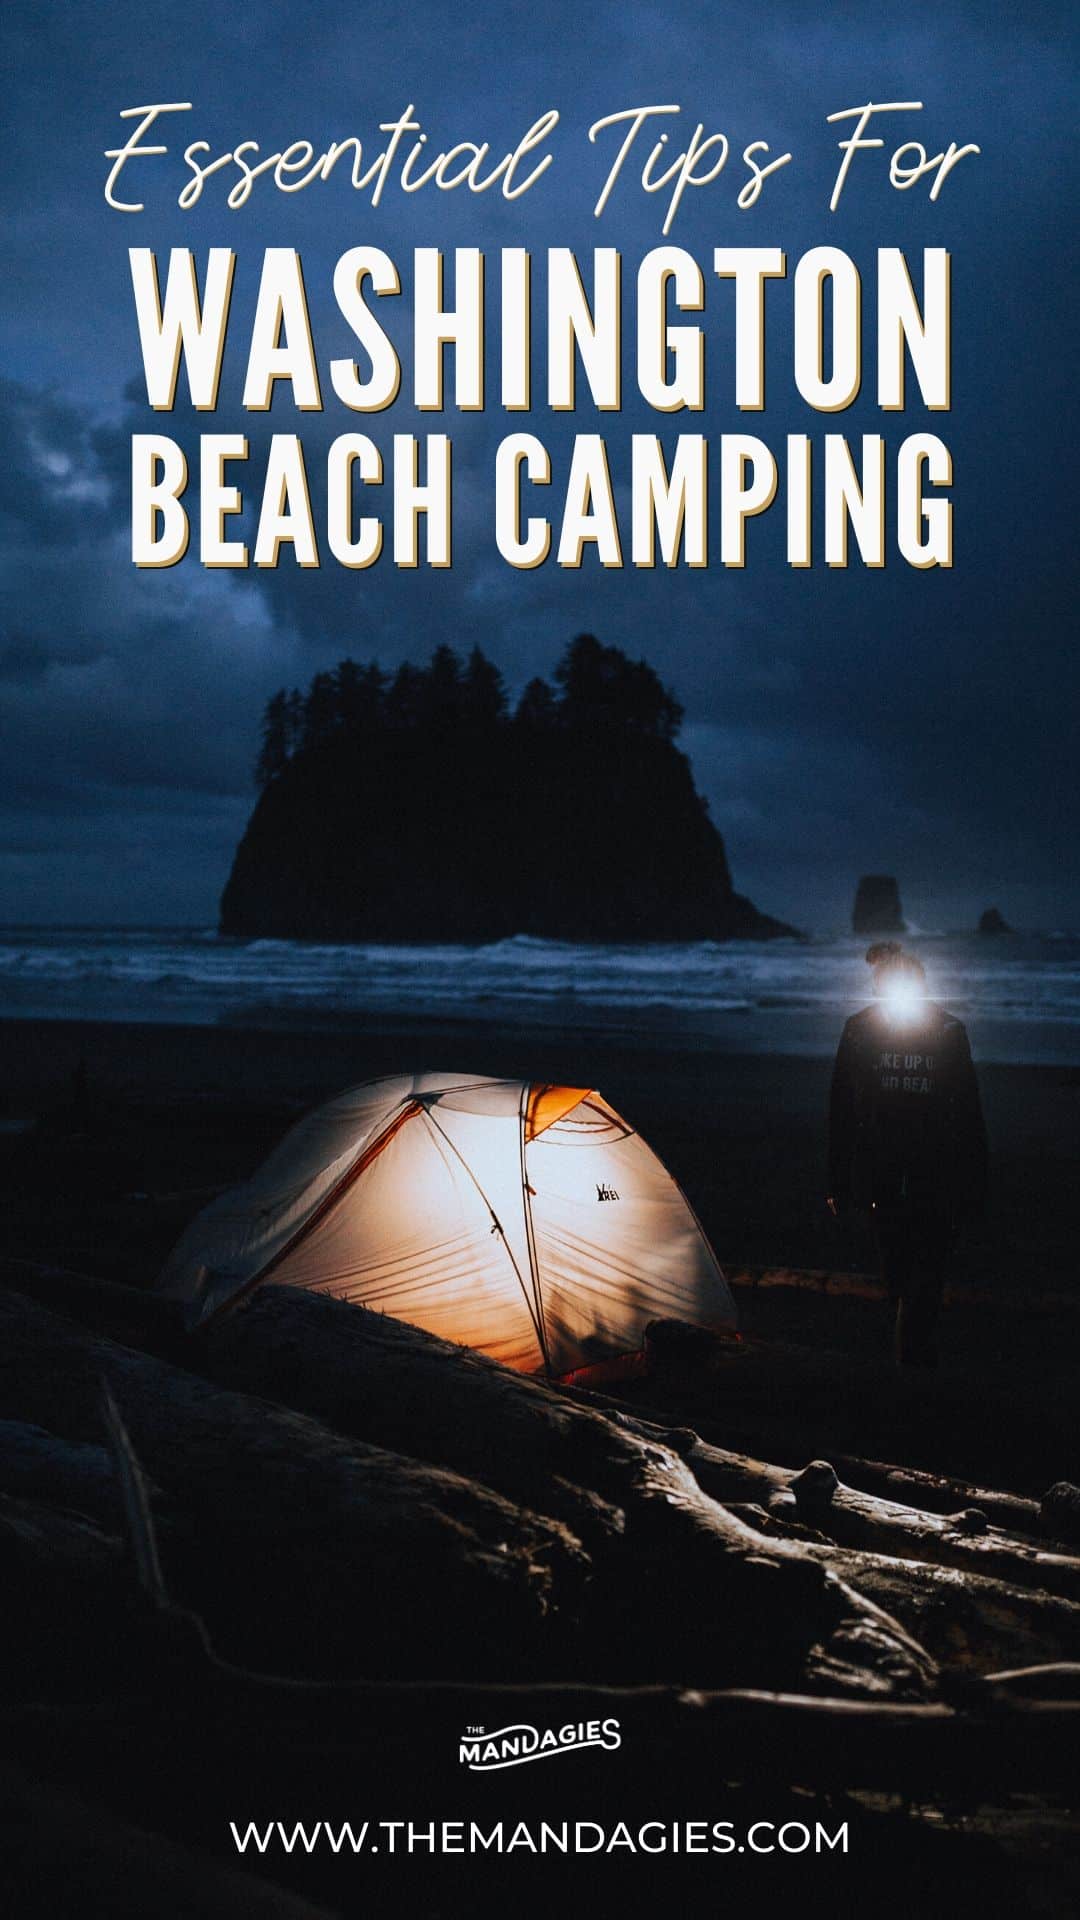 Ready to go camping on the beach but don't know where to start? We're sharing all our favorite tips for beach camping in Washington, including what to pack. permits to get, and what locations are the best! Save this post for your next adventure with beach camping in the Pacific Northwest! #beach #camping #beachcamping #backpacking #washington #PNW #pacificnorthwest #Oregon #britishcolumbia #PacificNW #travel #photography #traveltips #themandagies